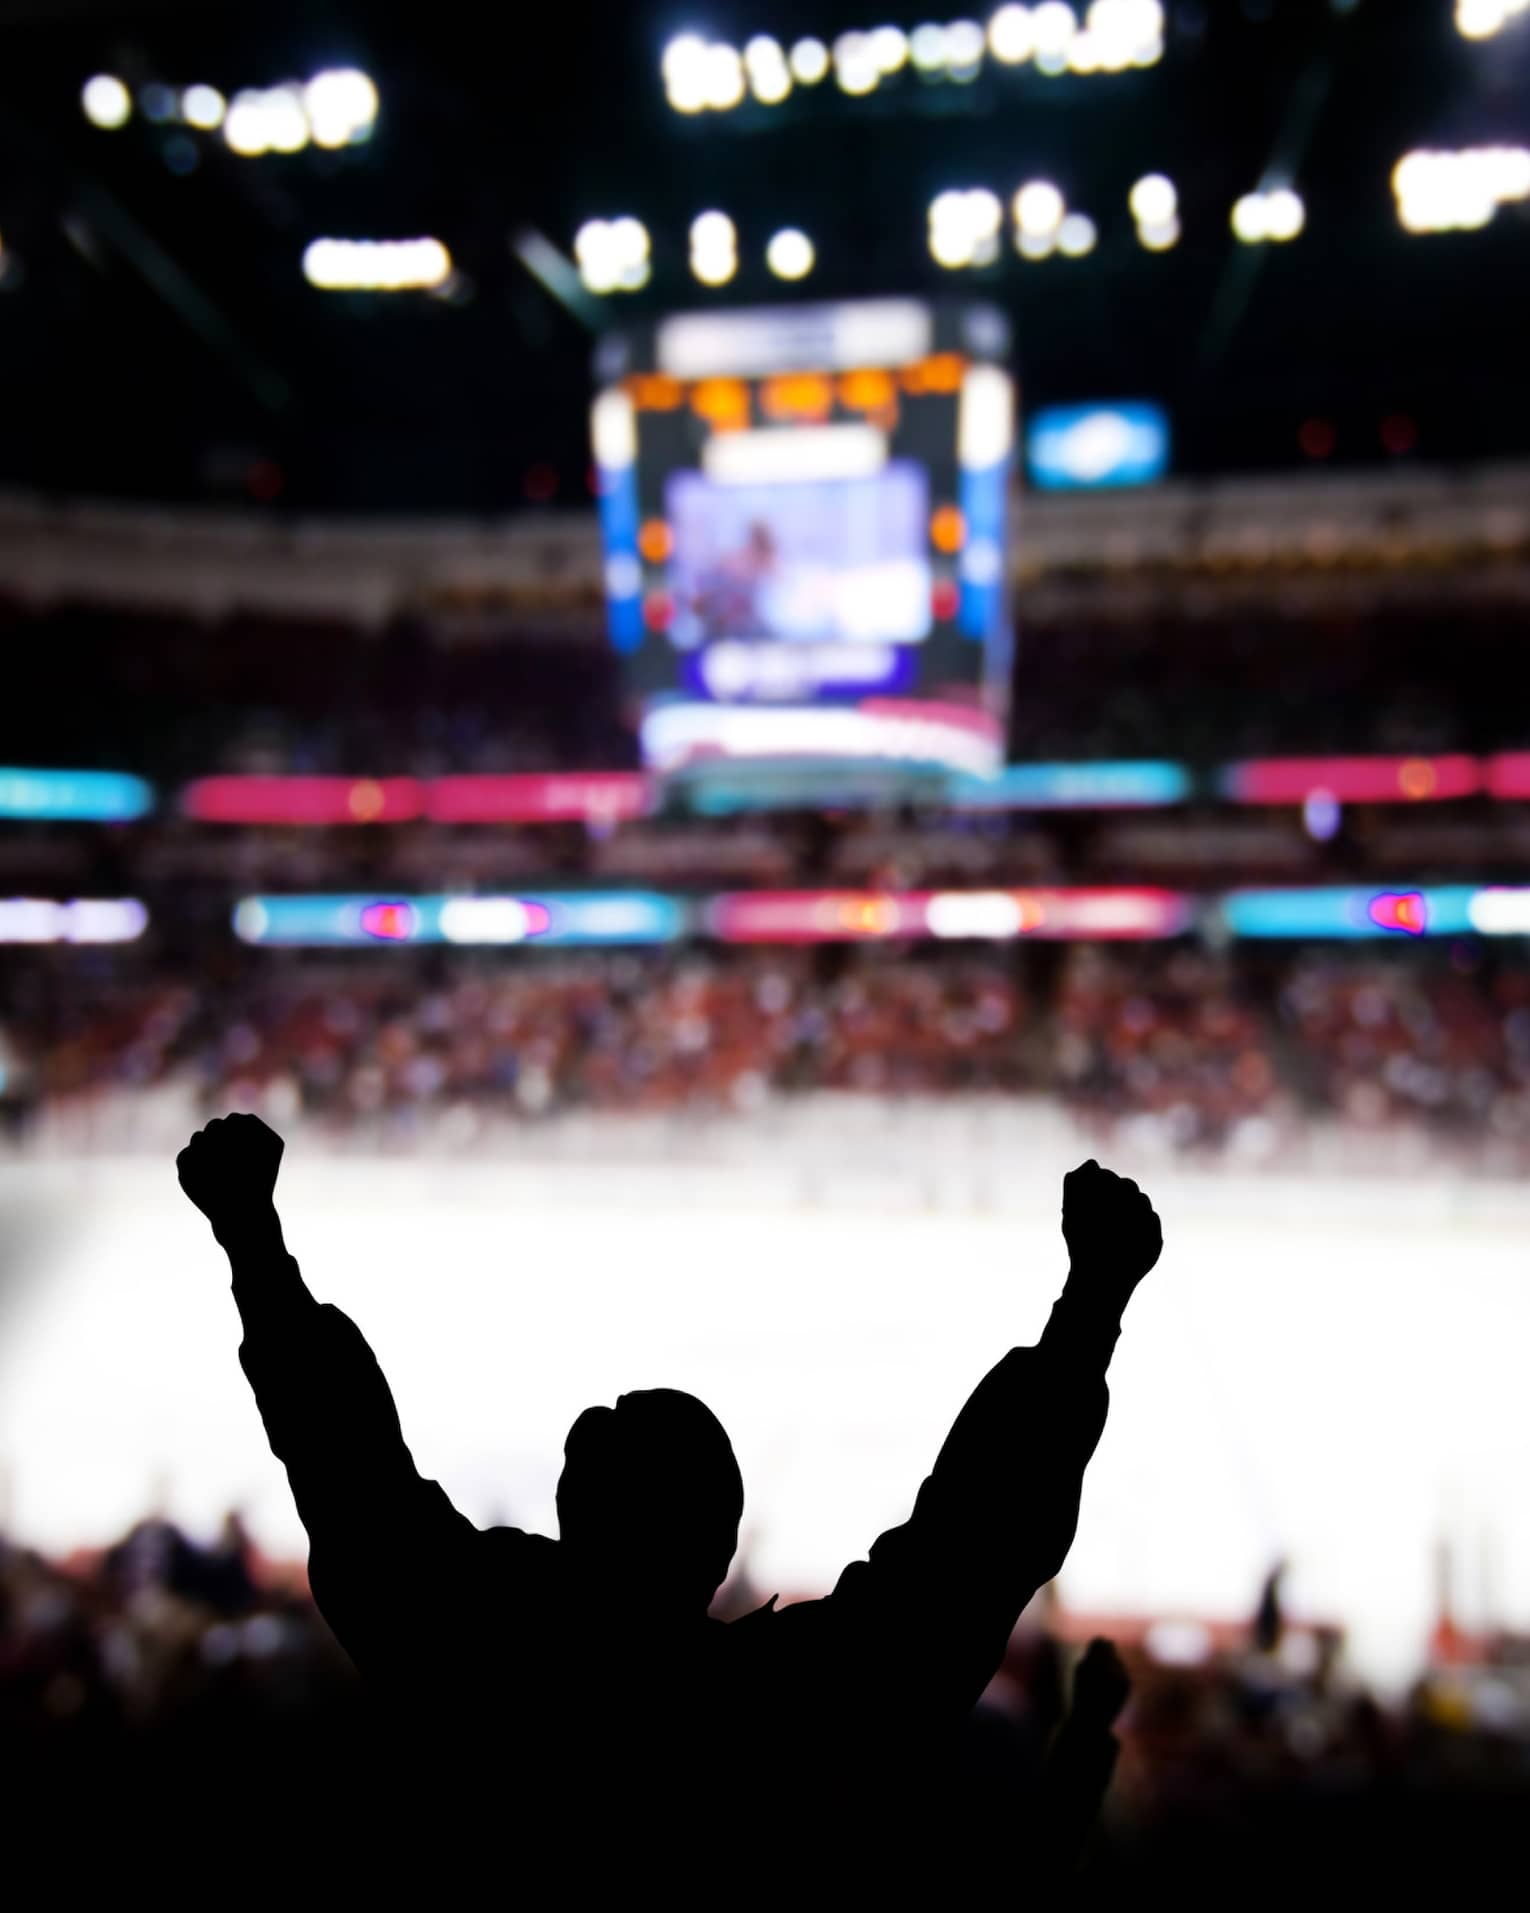 ,A fan cheering at a hockey game